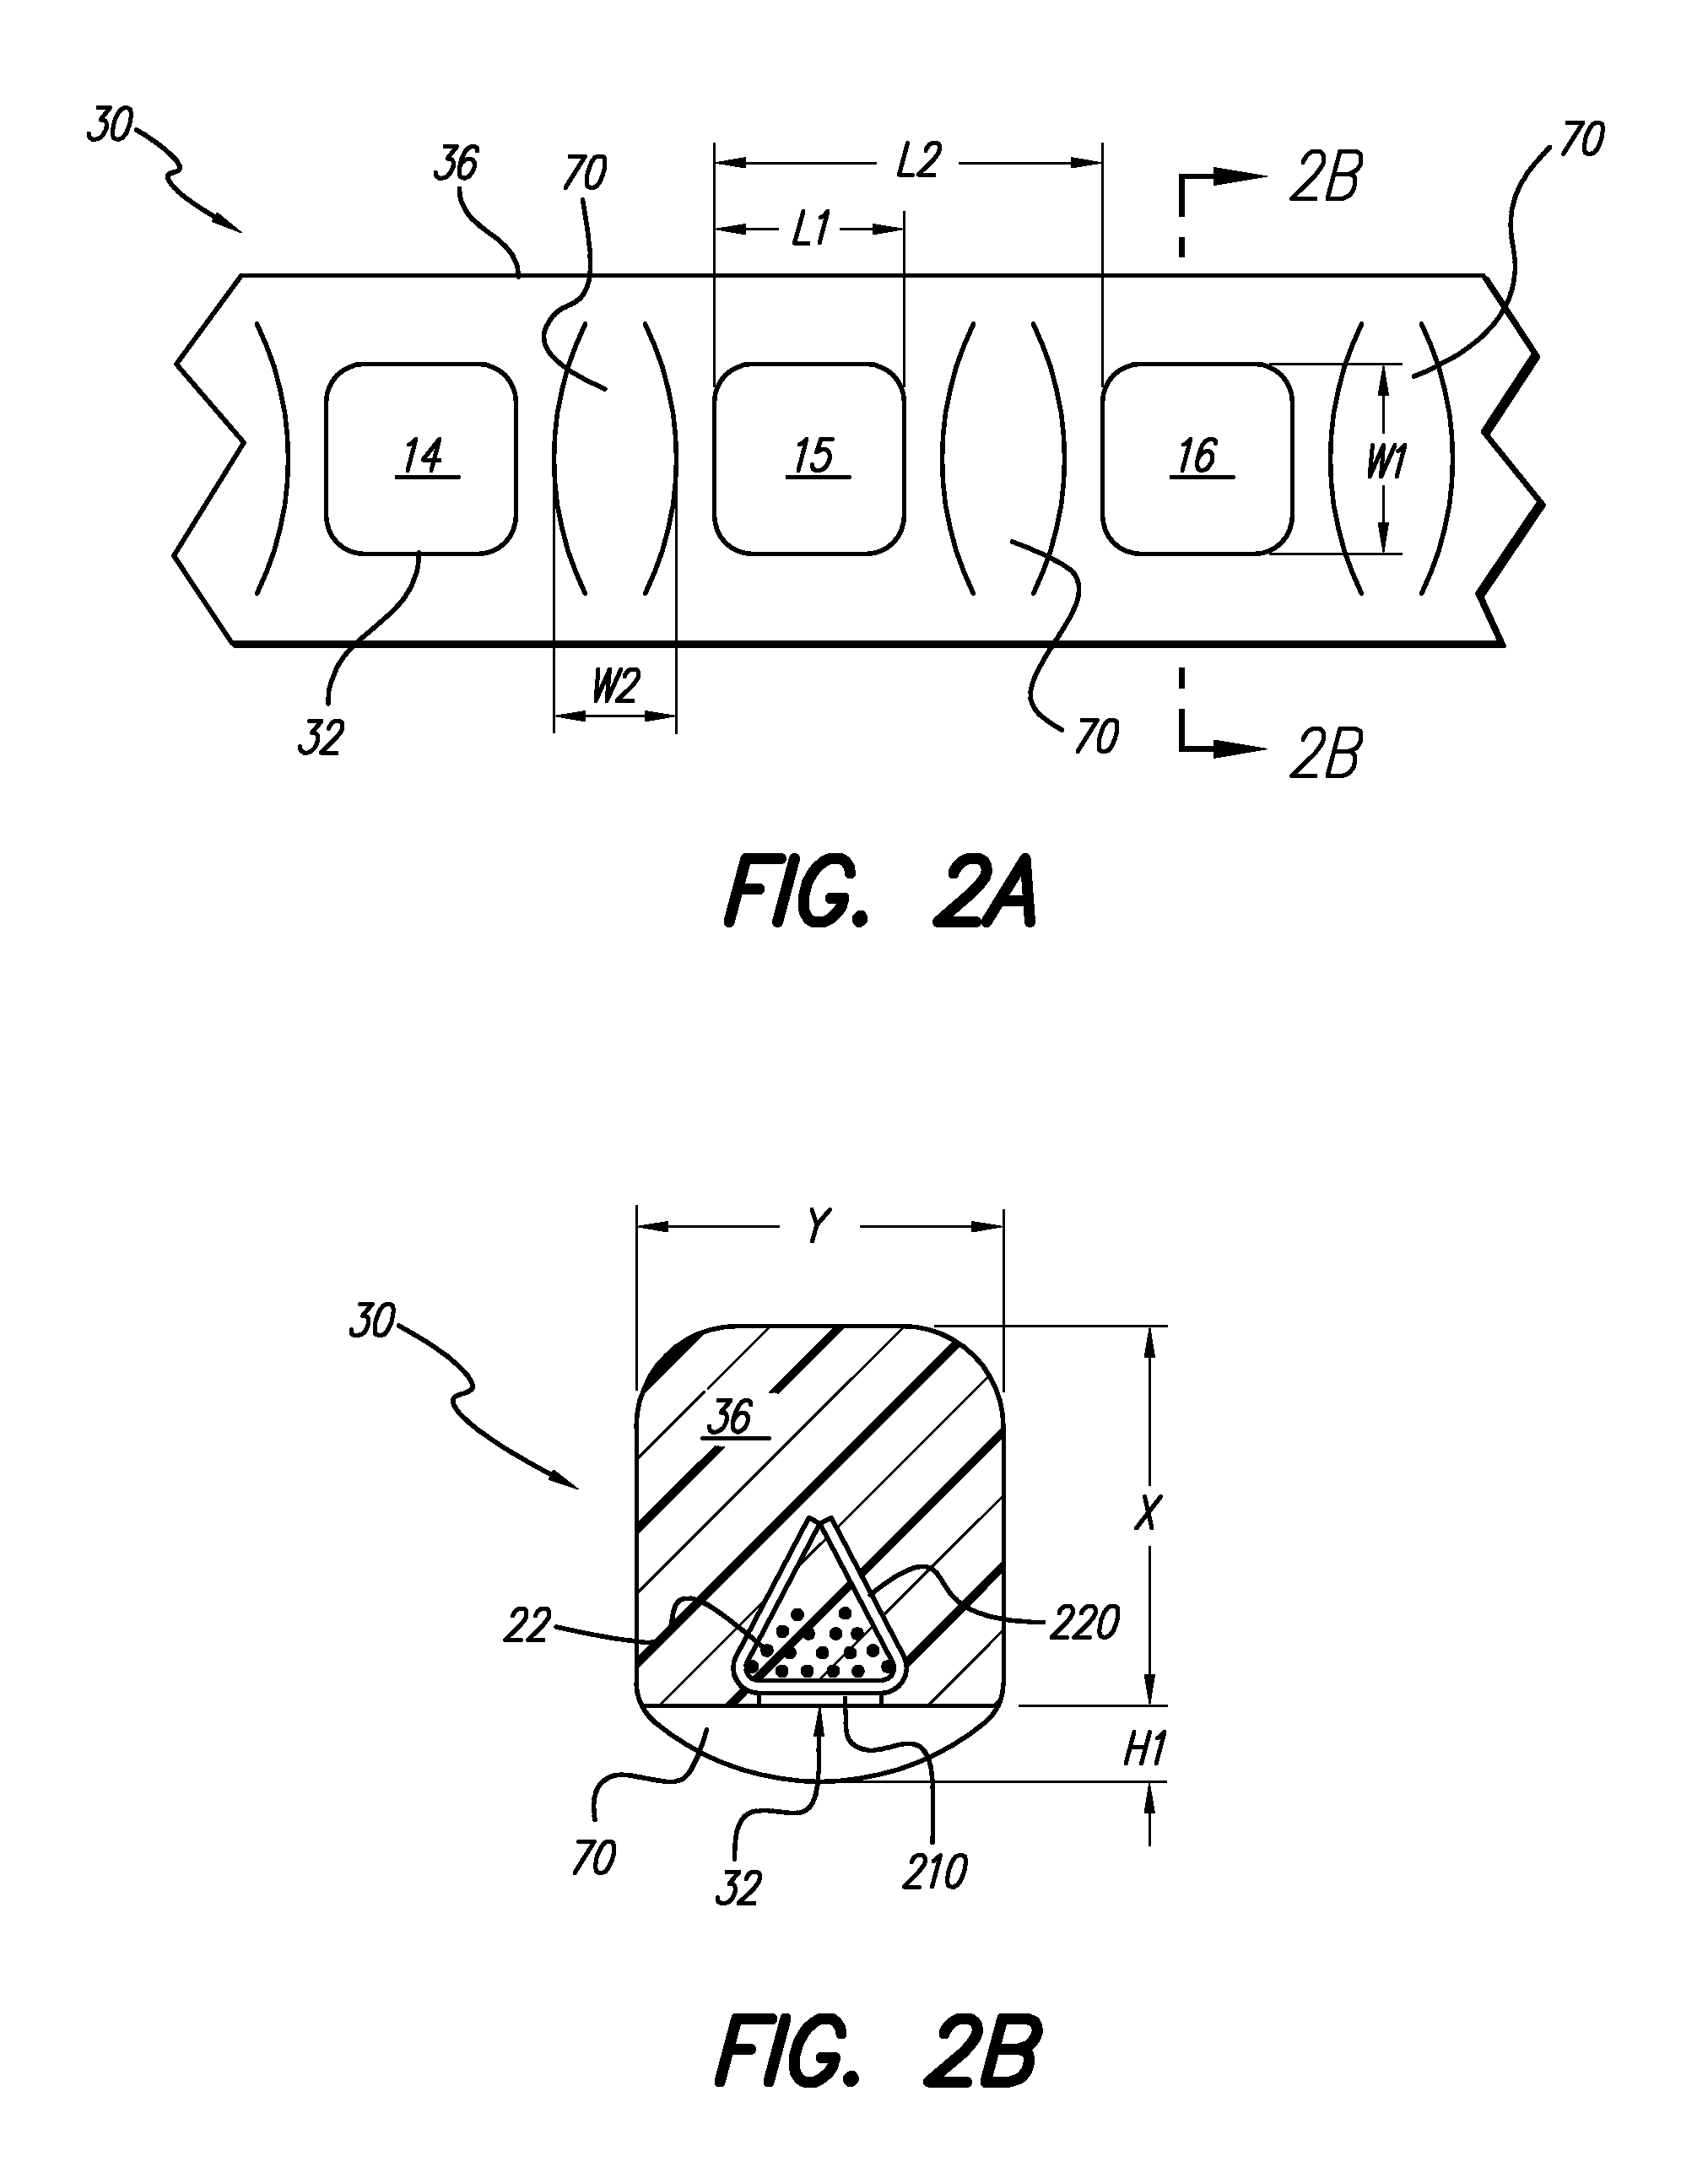 Coated electrode array having uncoated electrode contacts